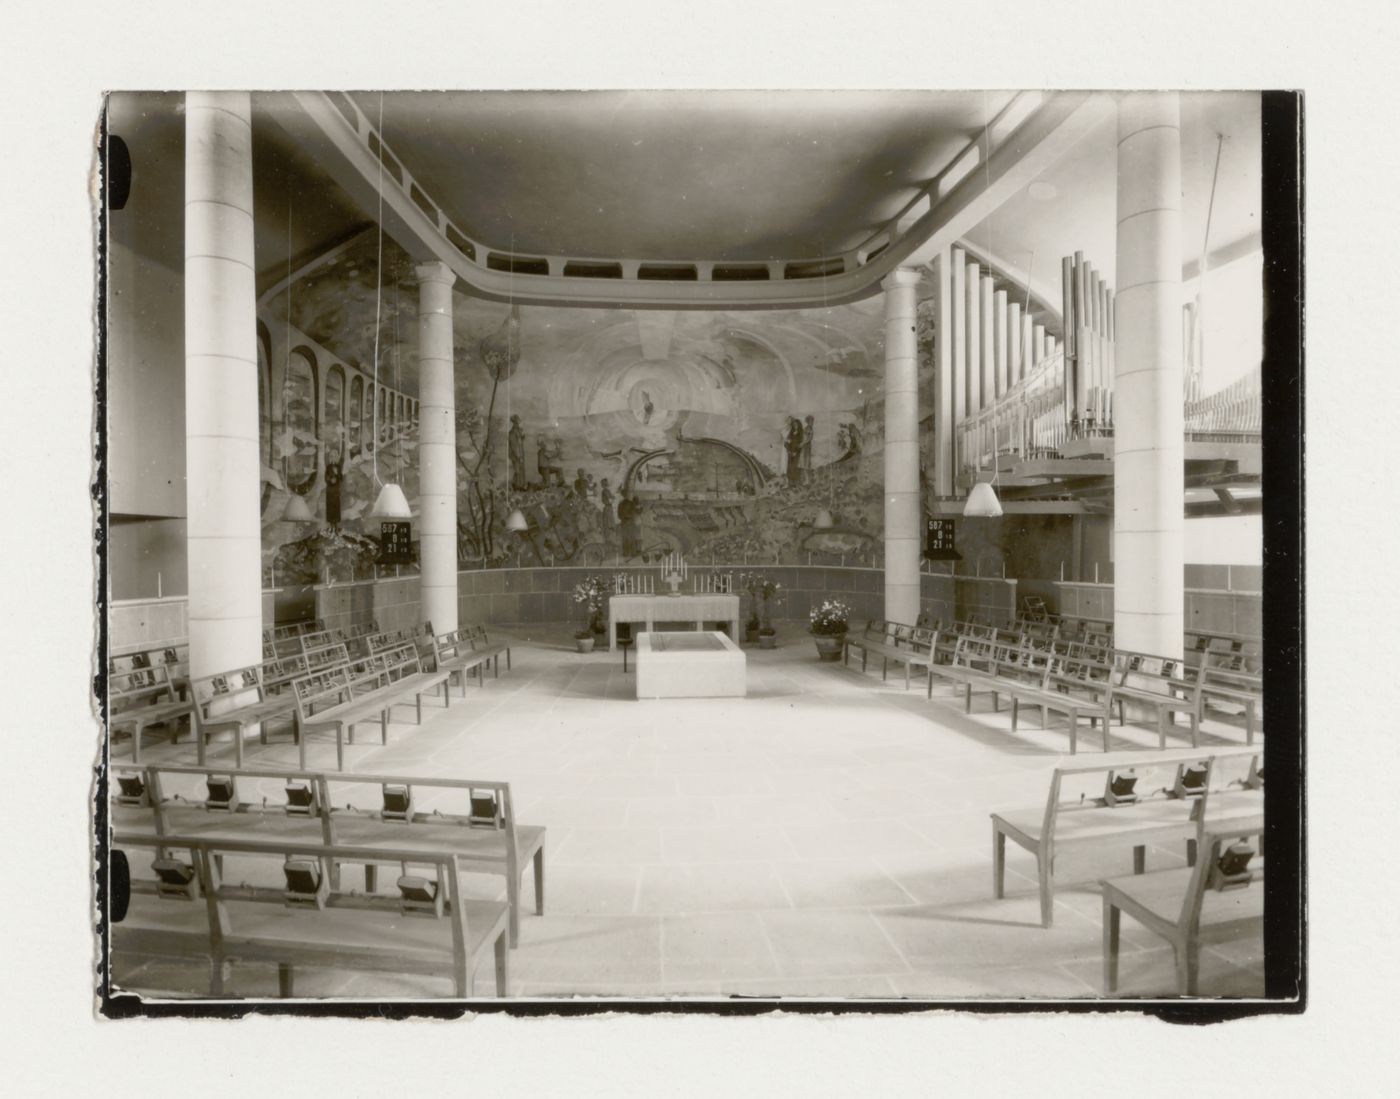 Interior view of the Chapel of the Holy Cross showing the altar, pews and the fresco designed by Sven Erixson, Woodland Crematorium and Cemetery, Stockholm